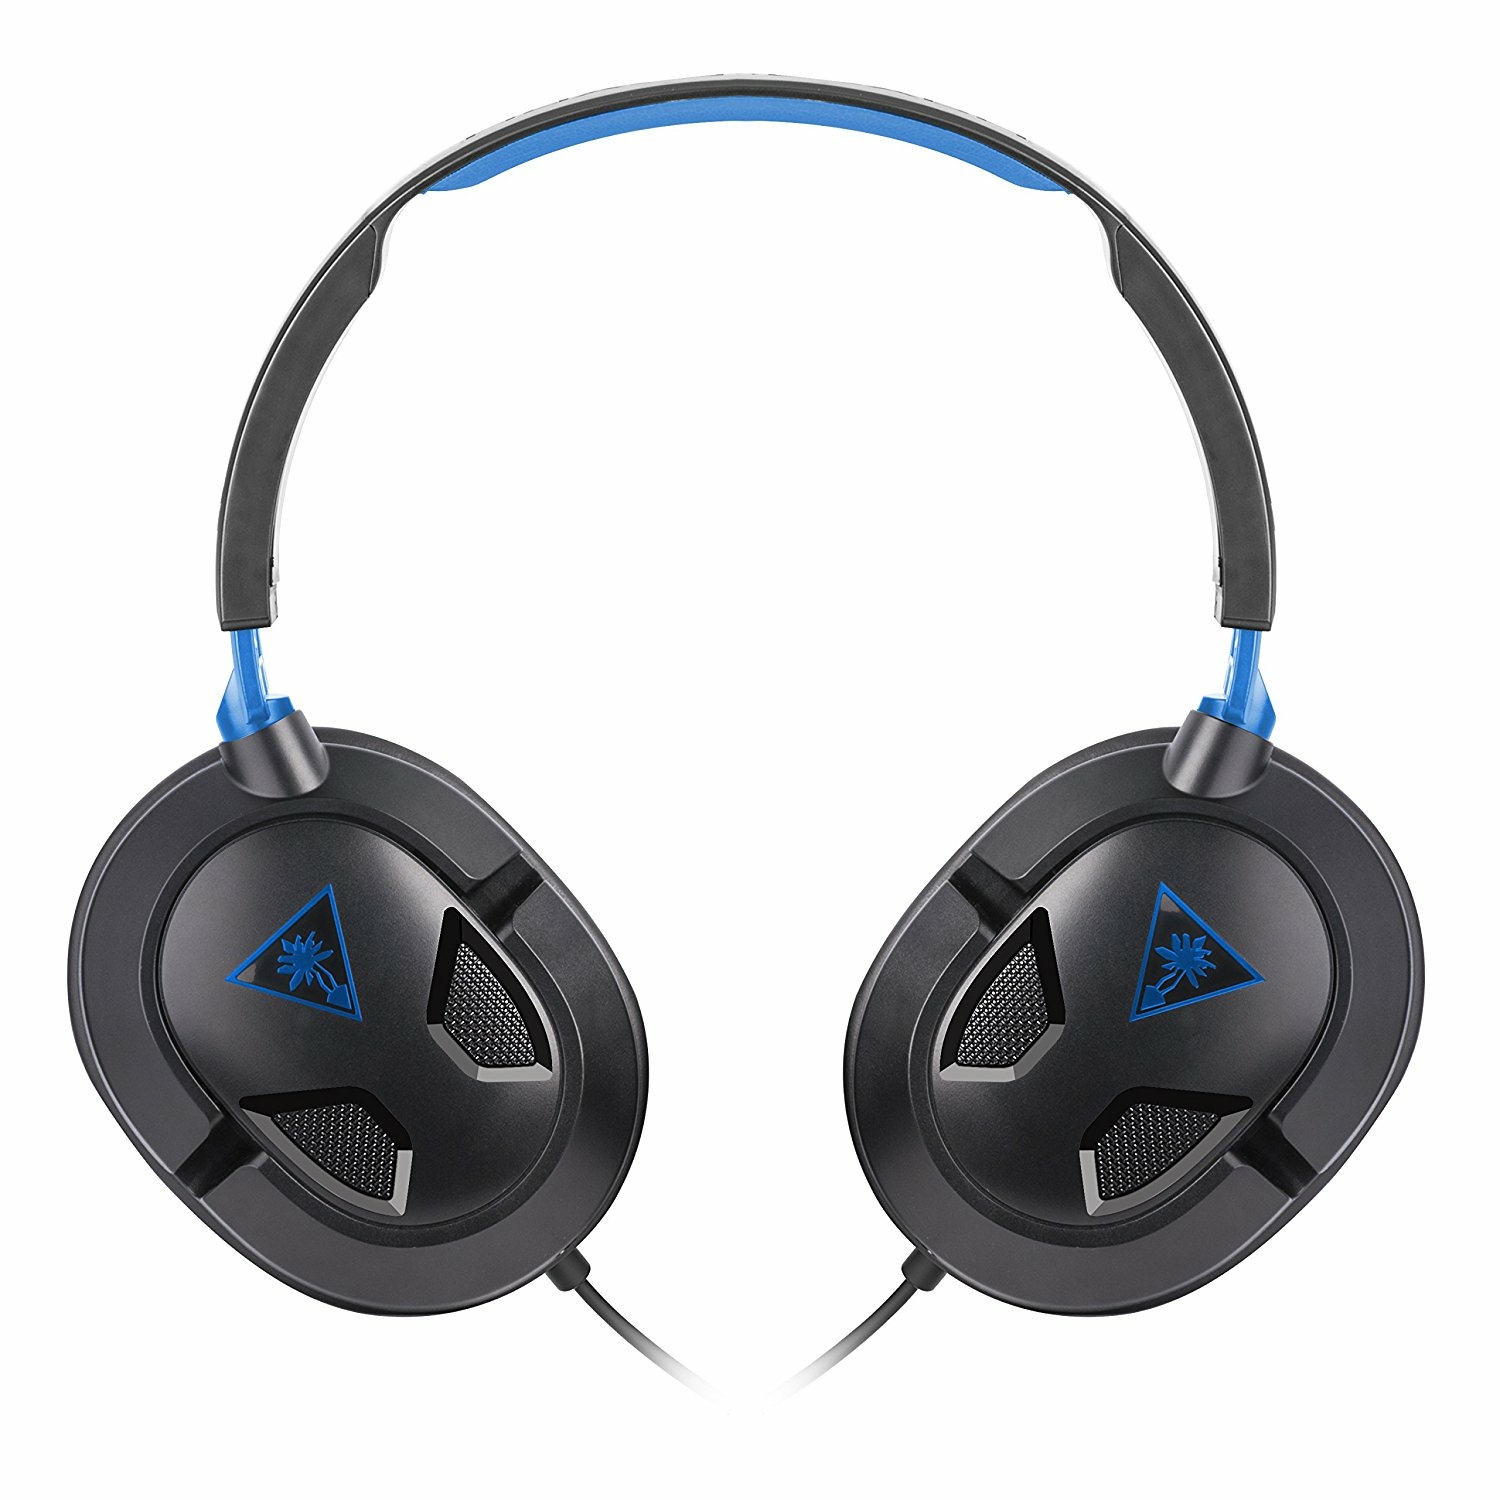 https://www.reference-gaming.com/assets/media/product/29832/casque-turtle-beach-ear-force-recon-50p-ps4-59b155036aa3a.jpg?format=product-cover-large&k=1589209505